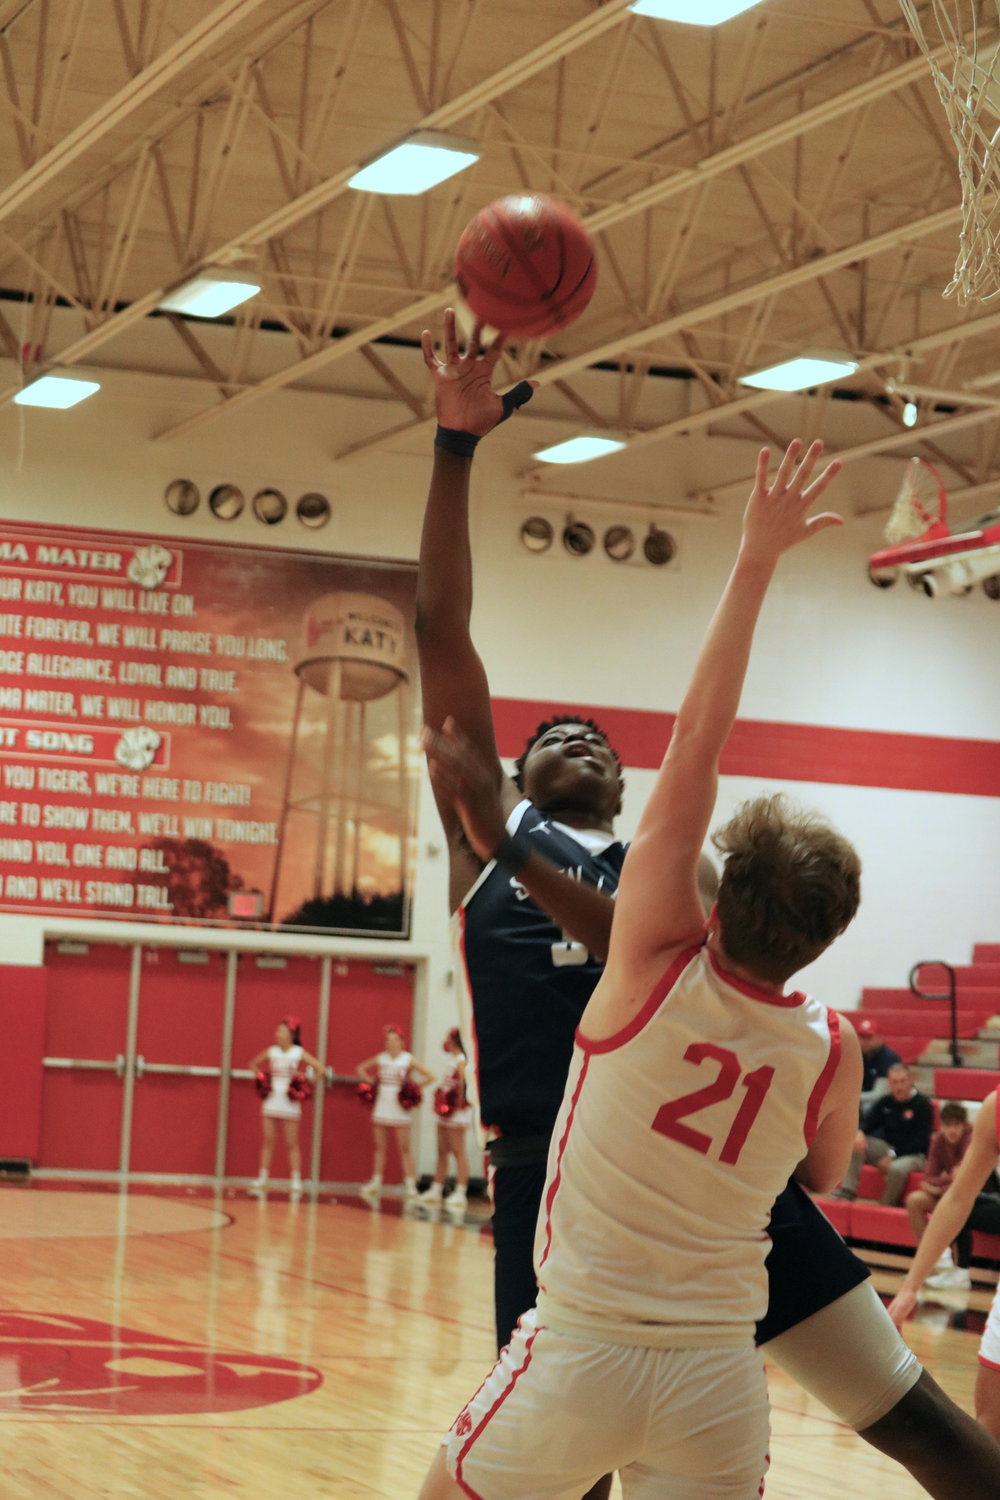 Josh Akpovwa shoots a hook shot during Saturday’s District 19-6A game between Seven Lakes and Katy at the Katy gym.